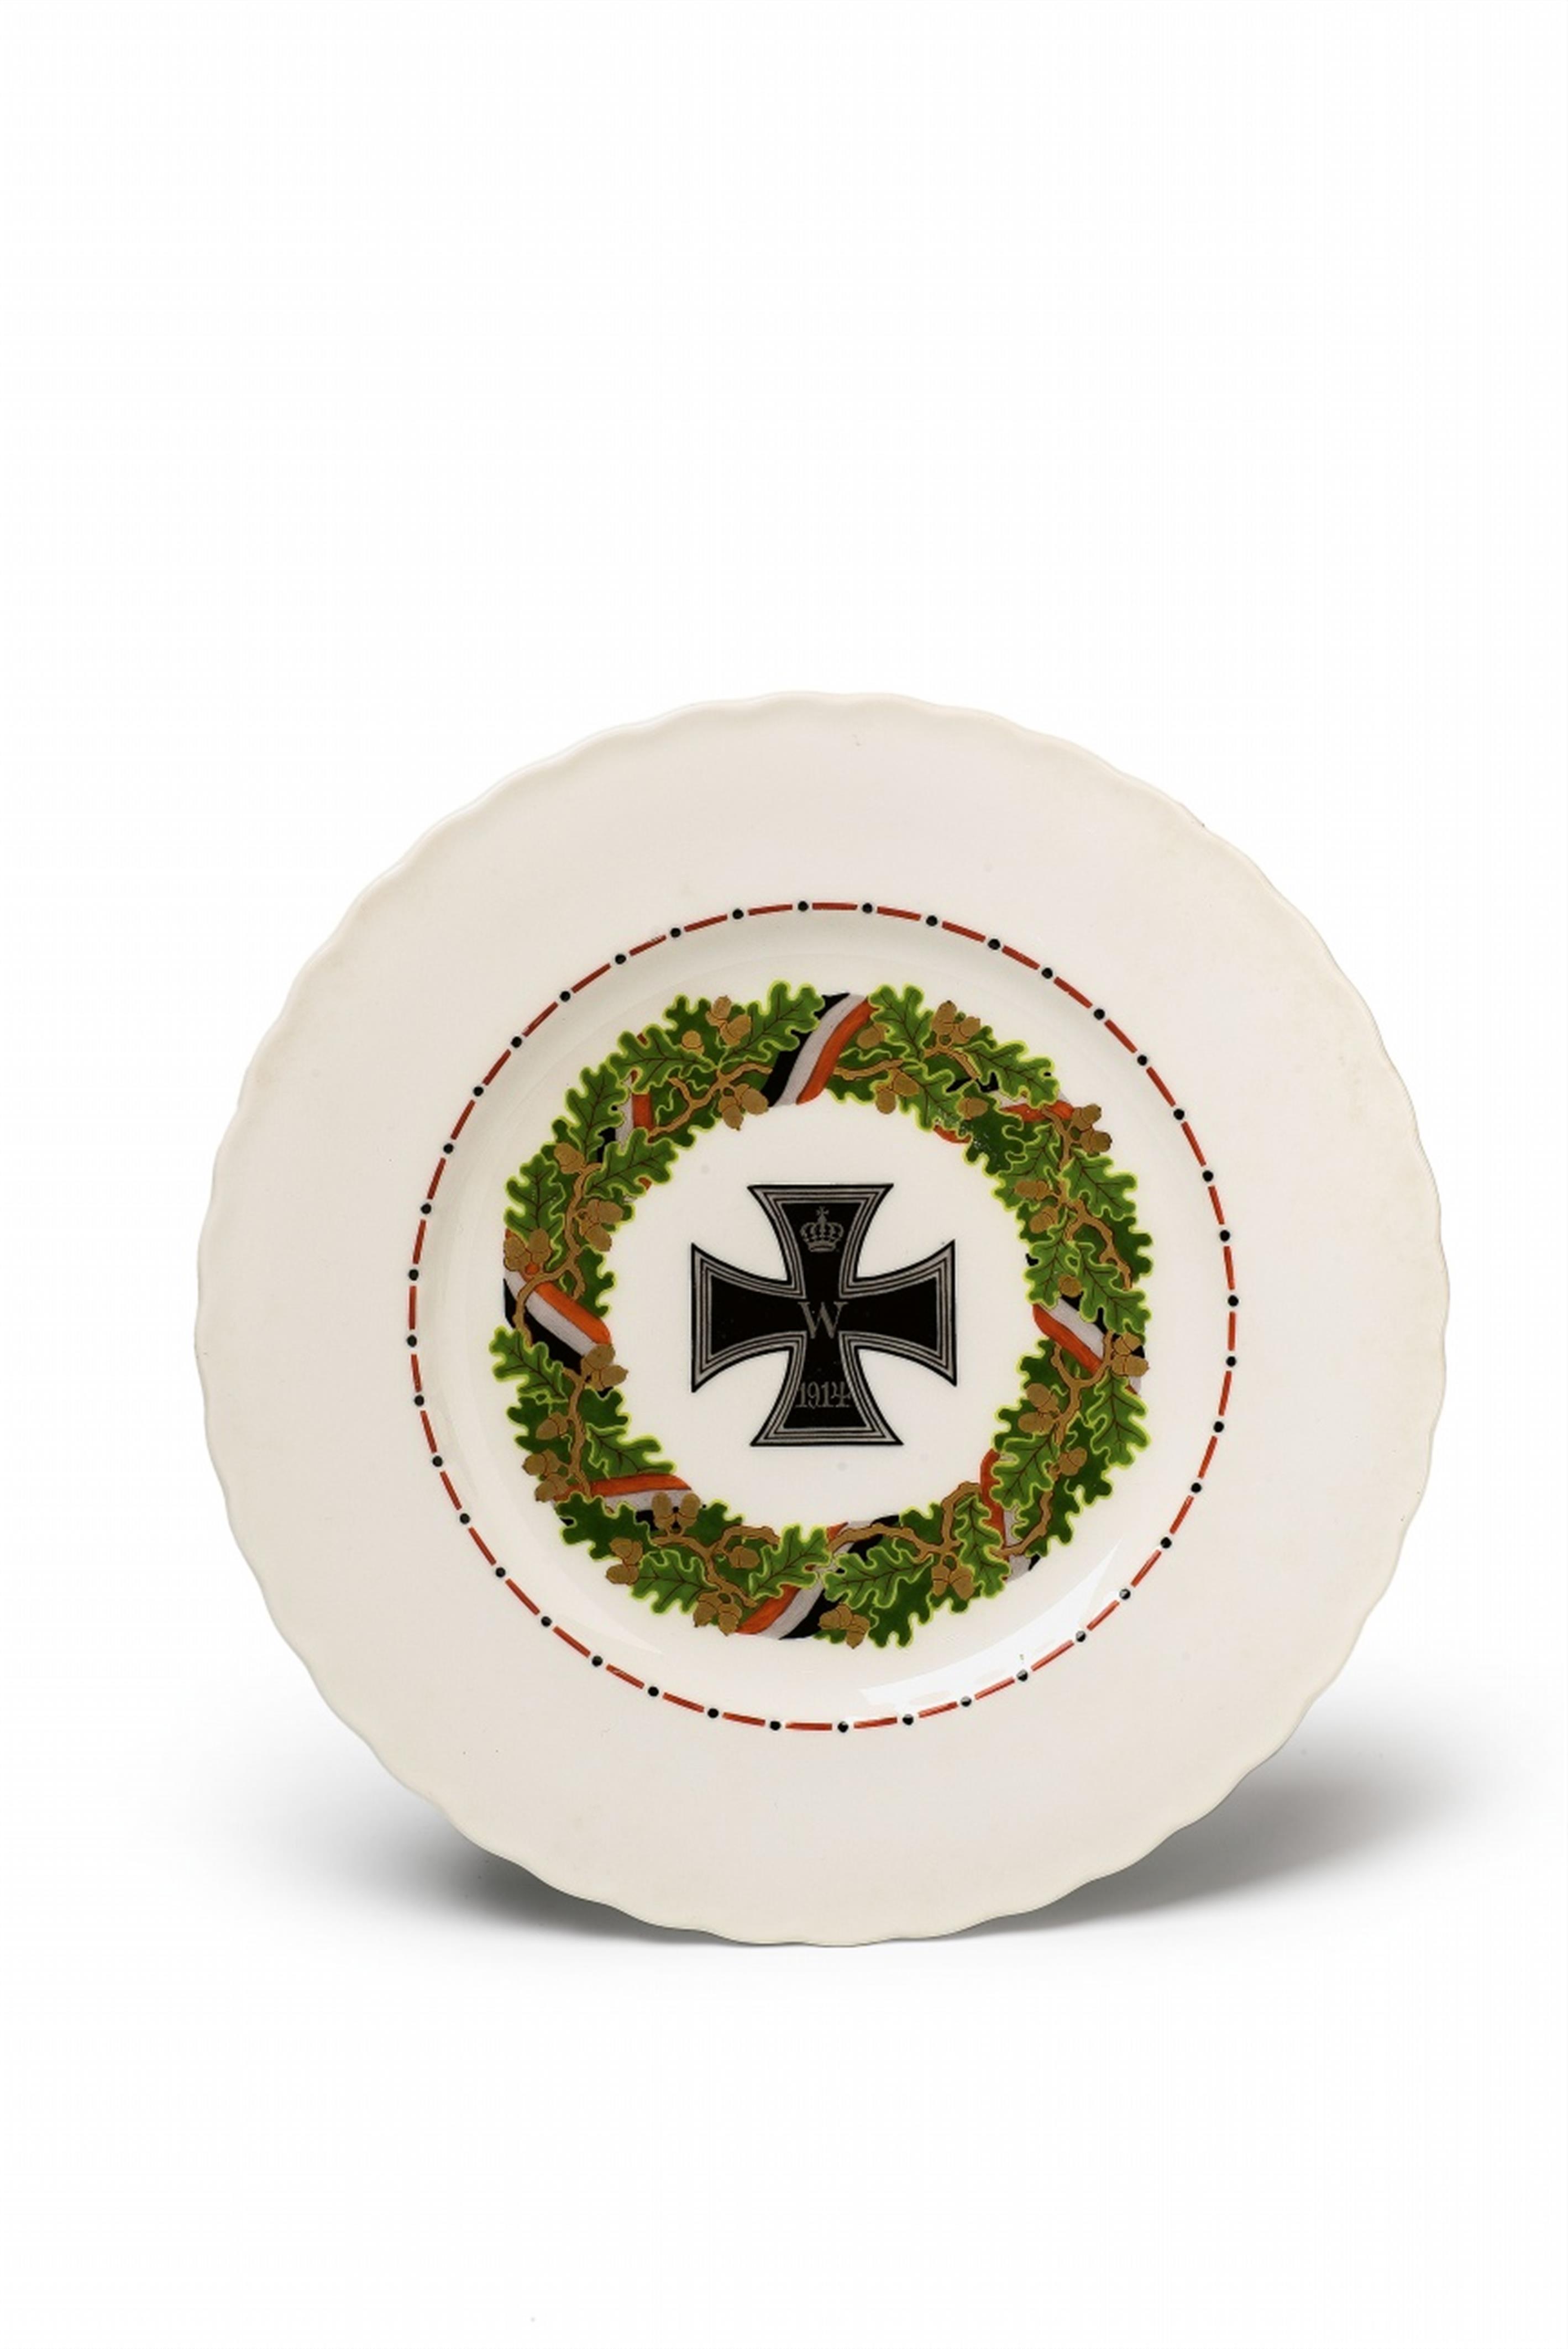 A Berlin KPM porcelain plate with the Iron Cross - image-1